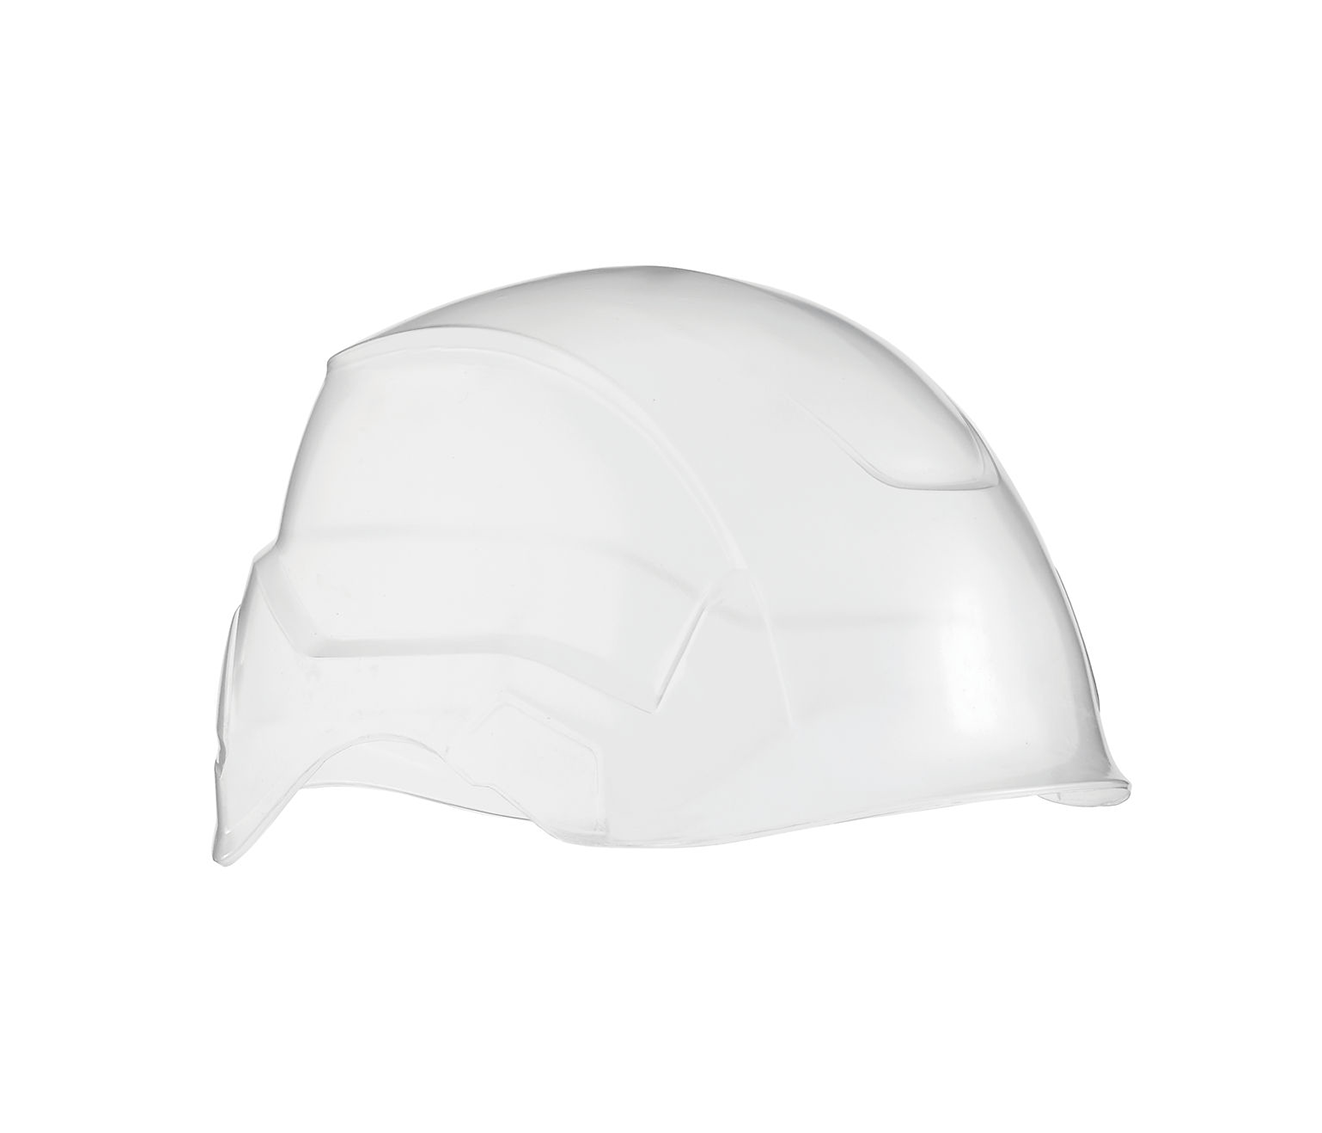 Protection for STRATO helmets